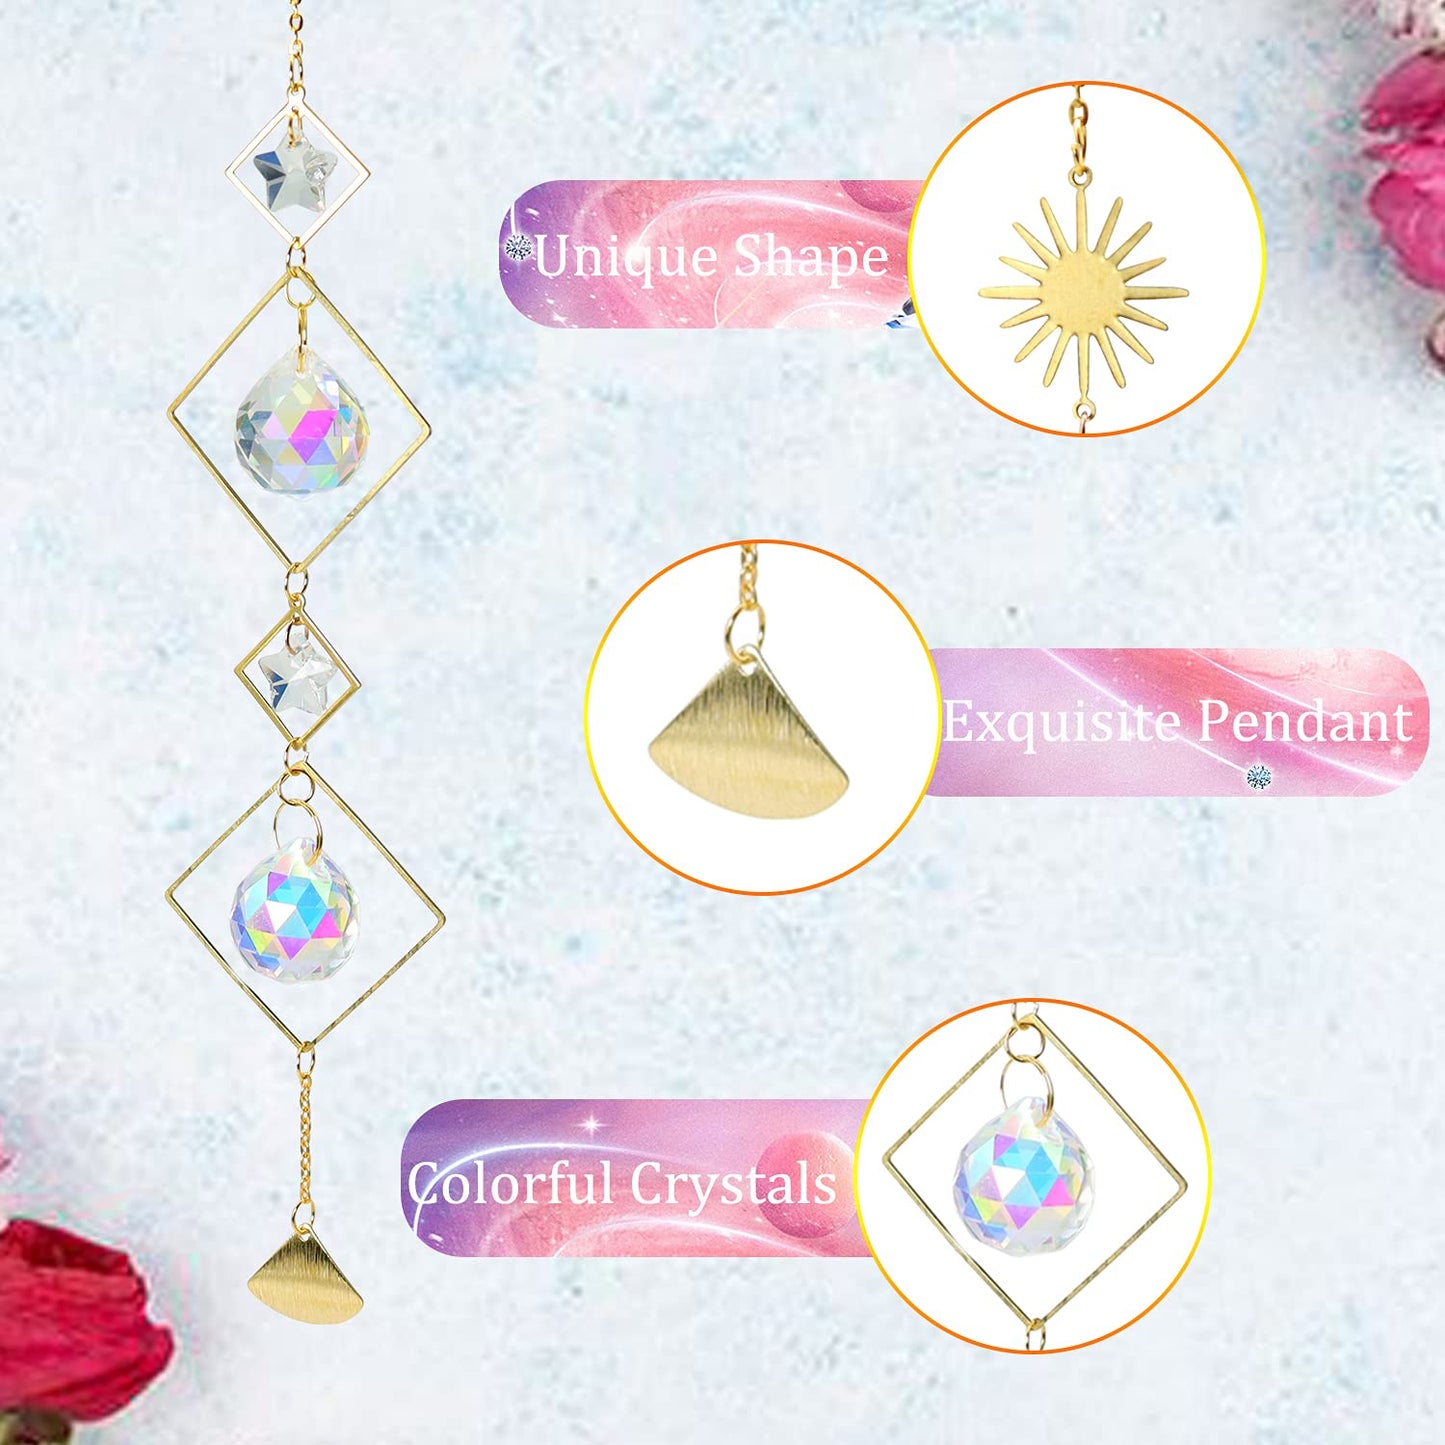 6Pieces Colorful Crystals Suncatcher Hanging Sun Catcher with Chain Pendant Ornament Crystal Balls for Window Home Garden Christmas Day Party Wedding Decoration